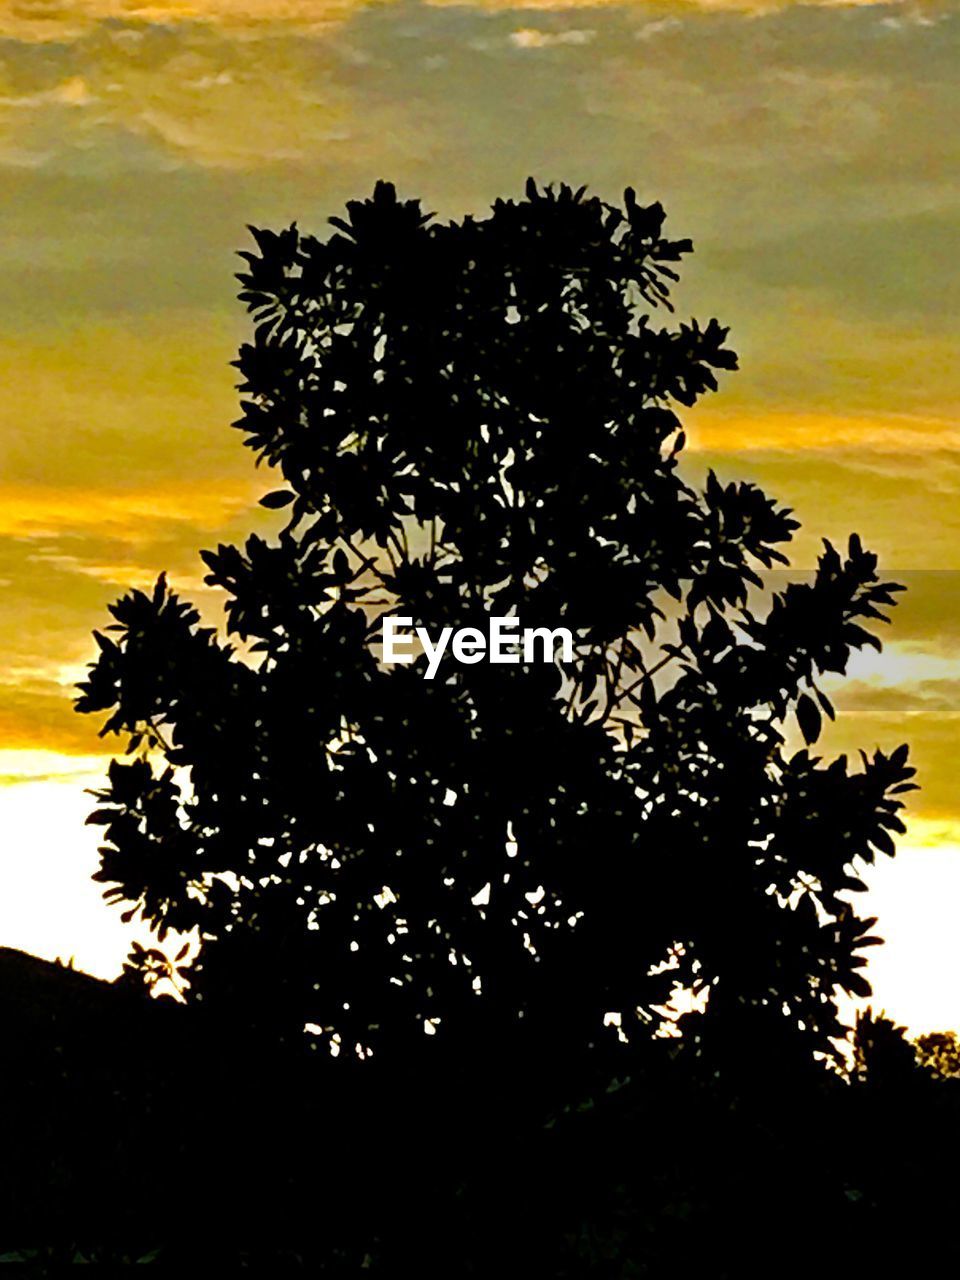 CLOSE-UP OF SILHOUETTE TREE AGAINST SKY